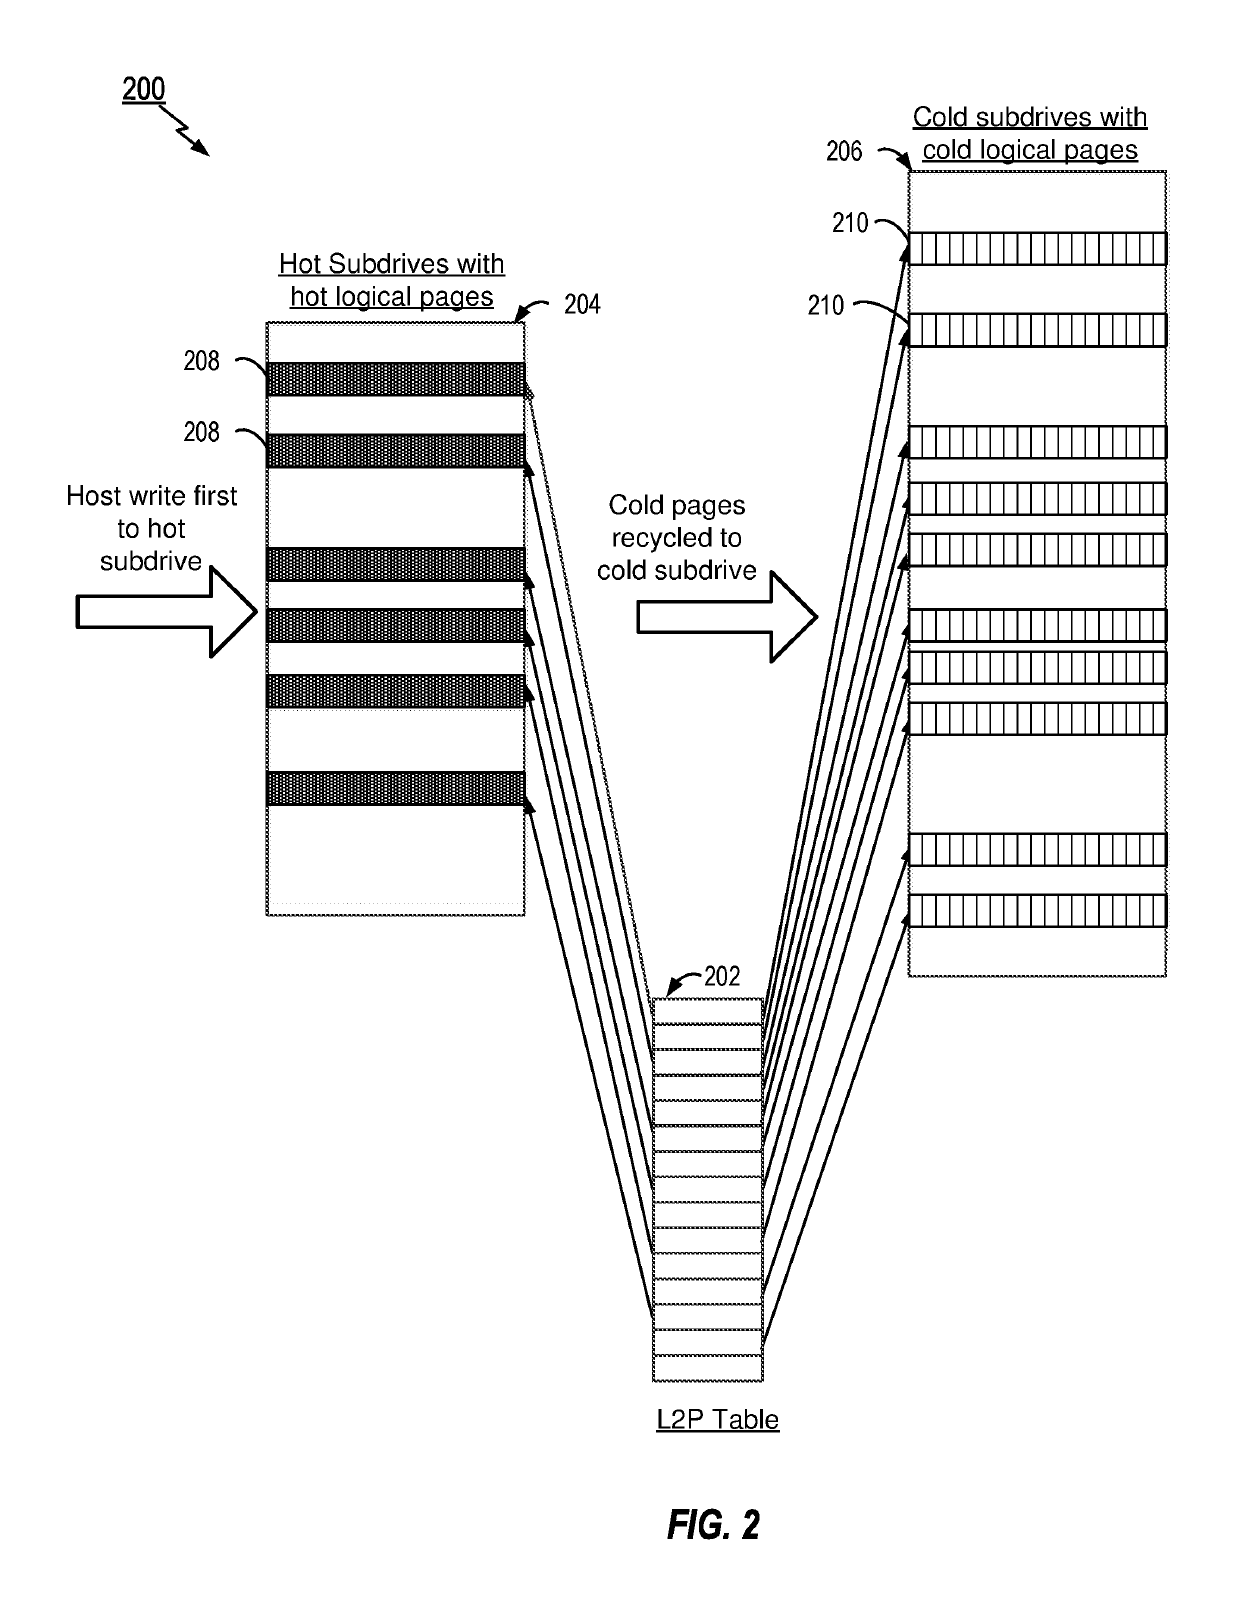 Methods and apparatus for variable size logical page management based on hot and cold data